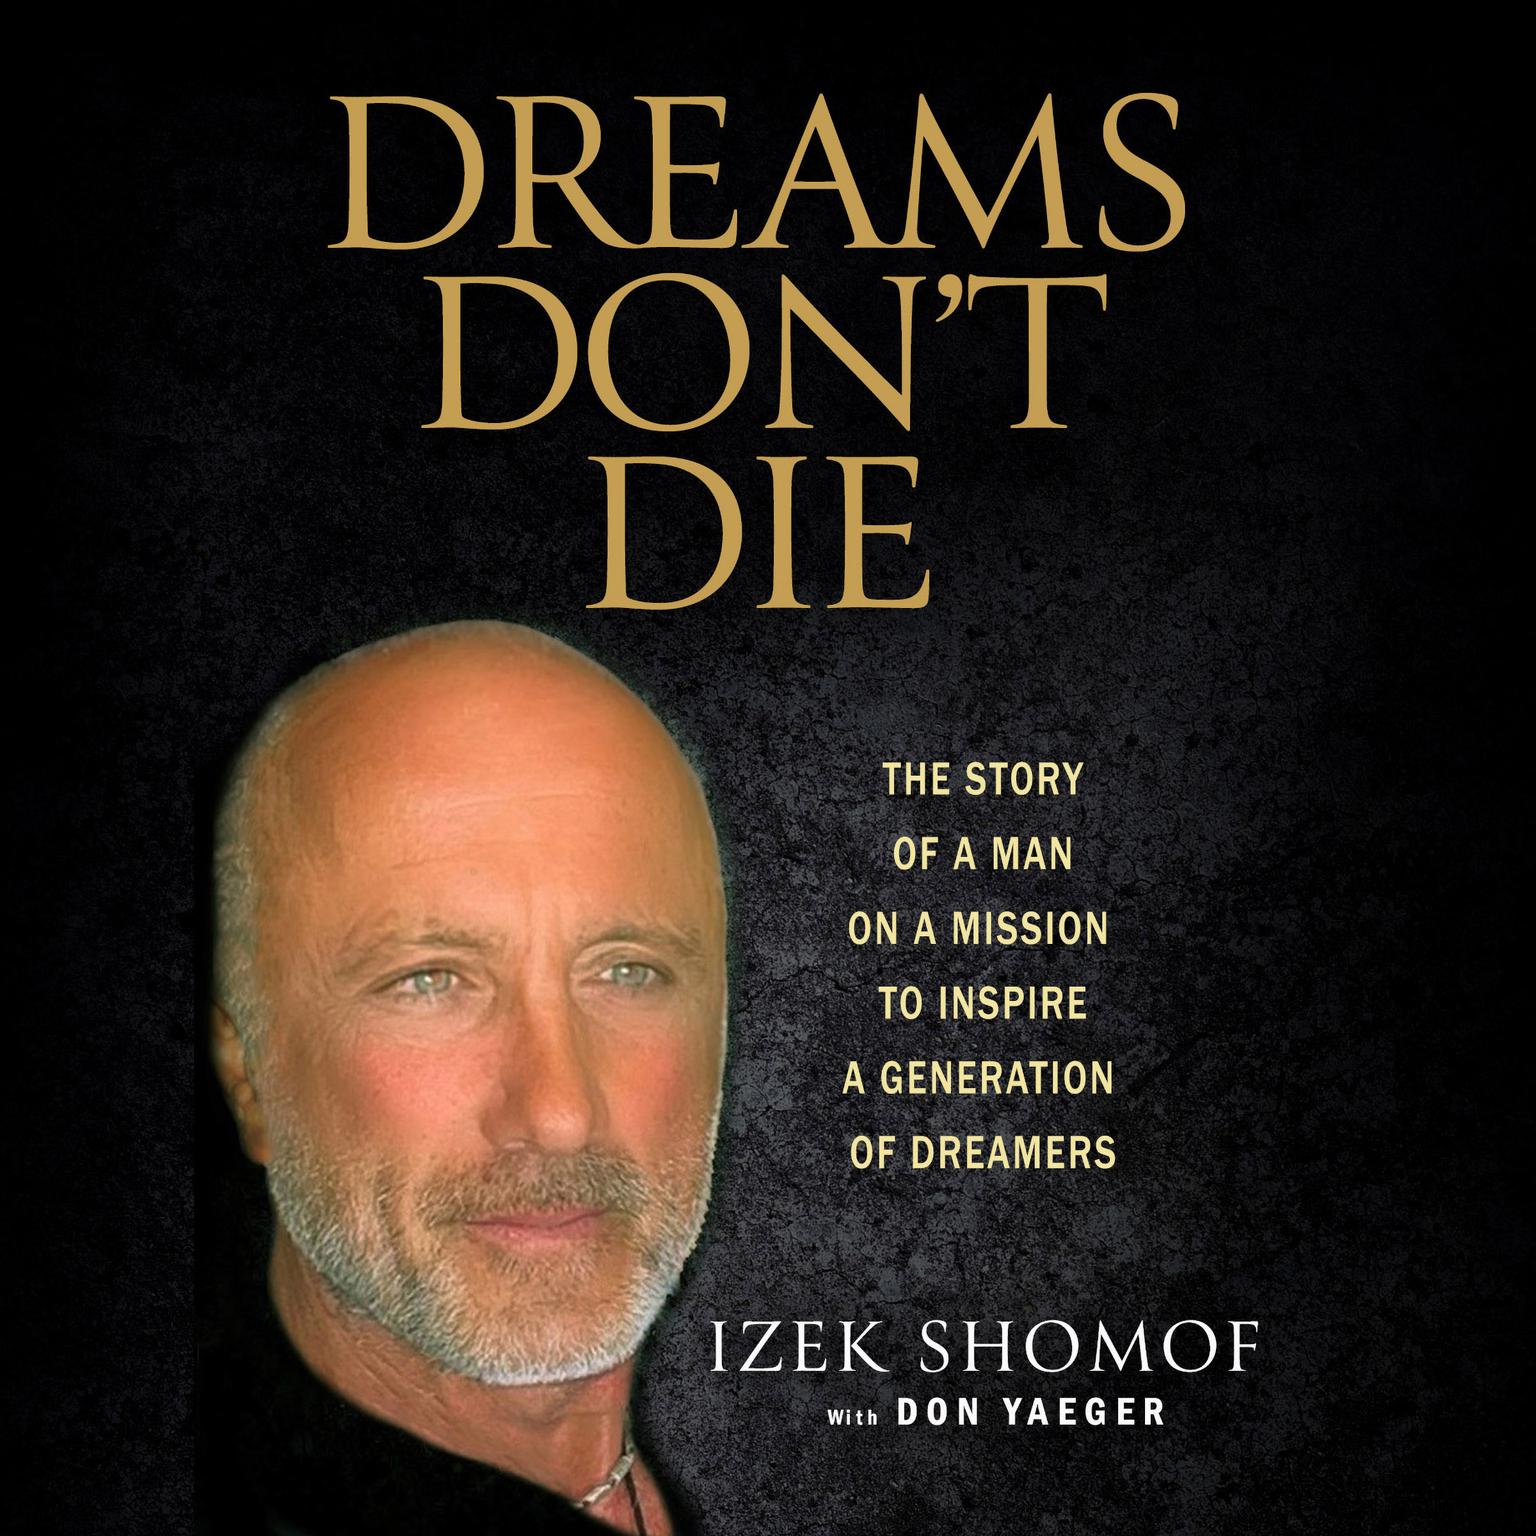 Dreams Dont Die: The Story of a Man on a Mission to Inspire a Generation of Dreamers Audiobook, by Izek Shomof